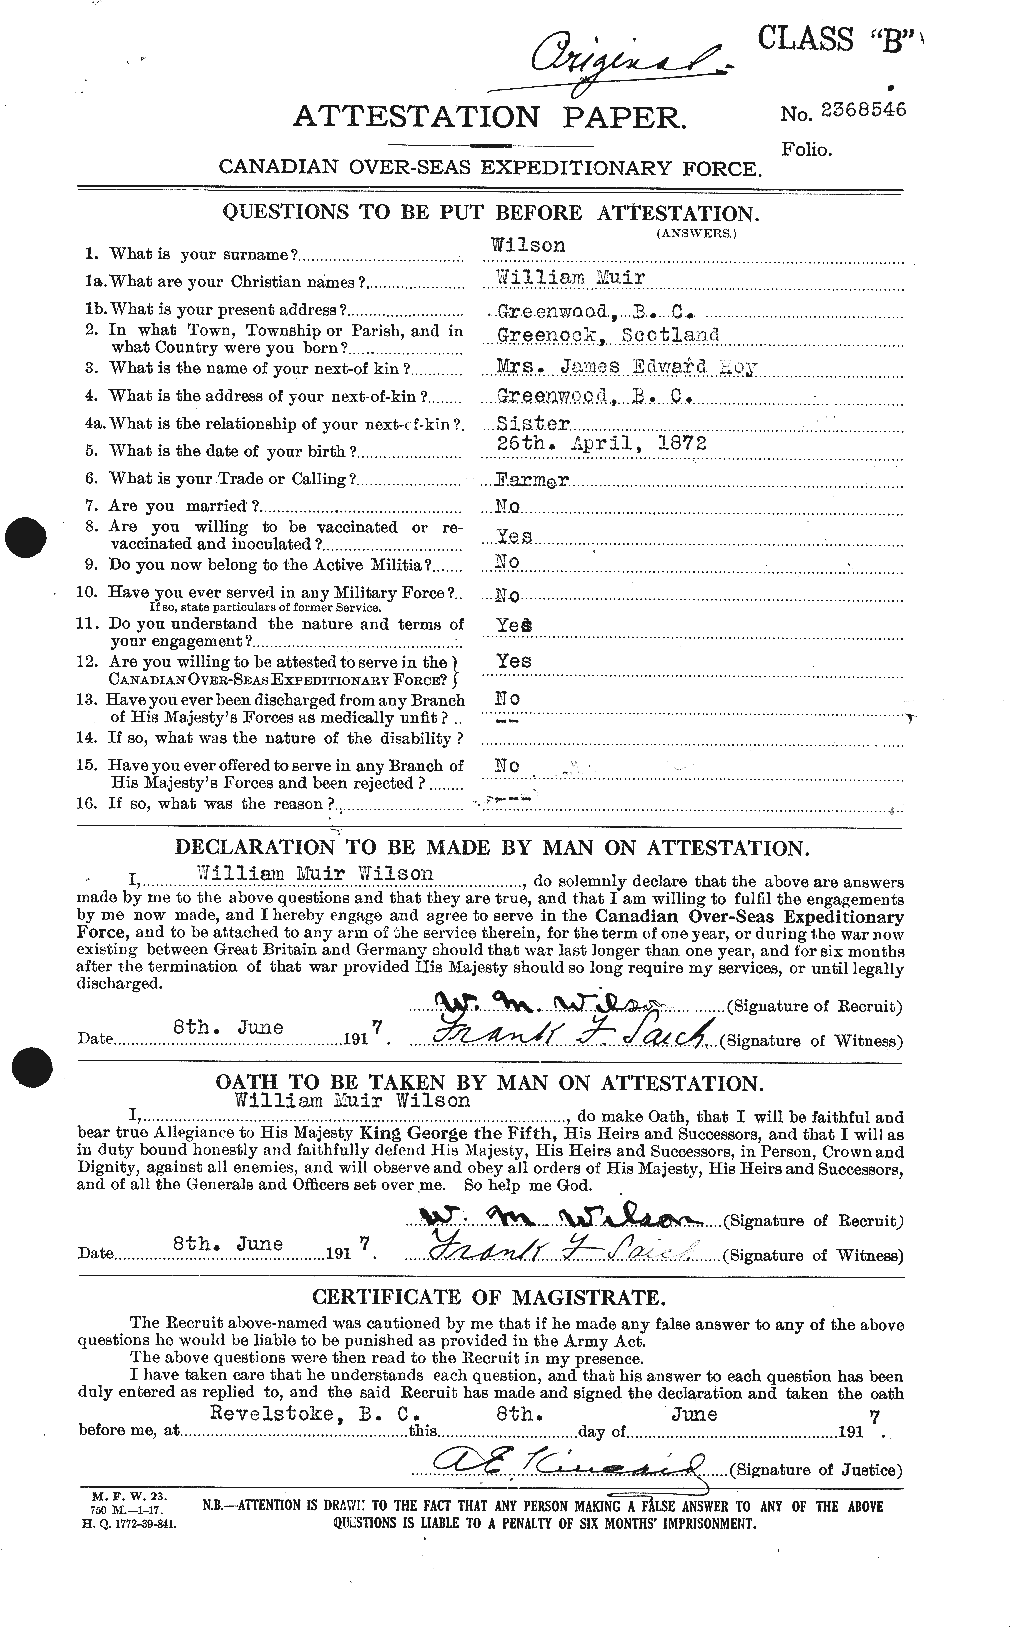 Personnel Records of the First World War - CEF 684080a